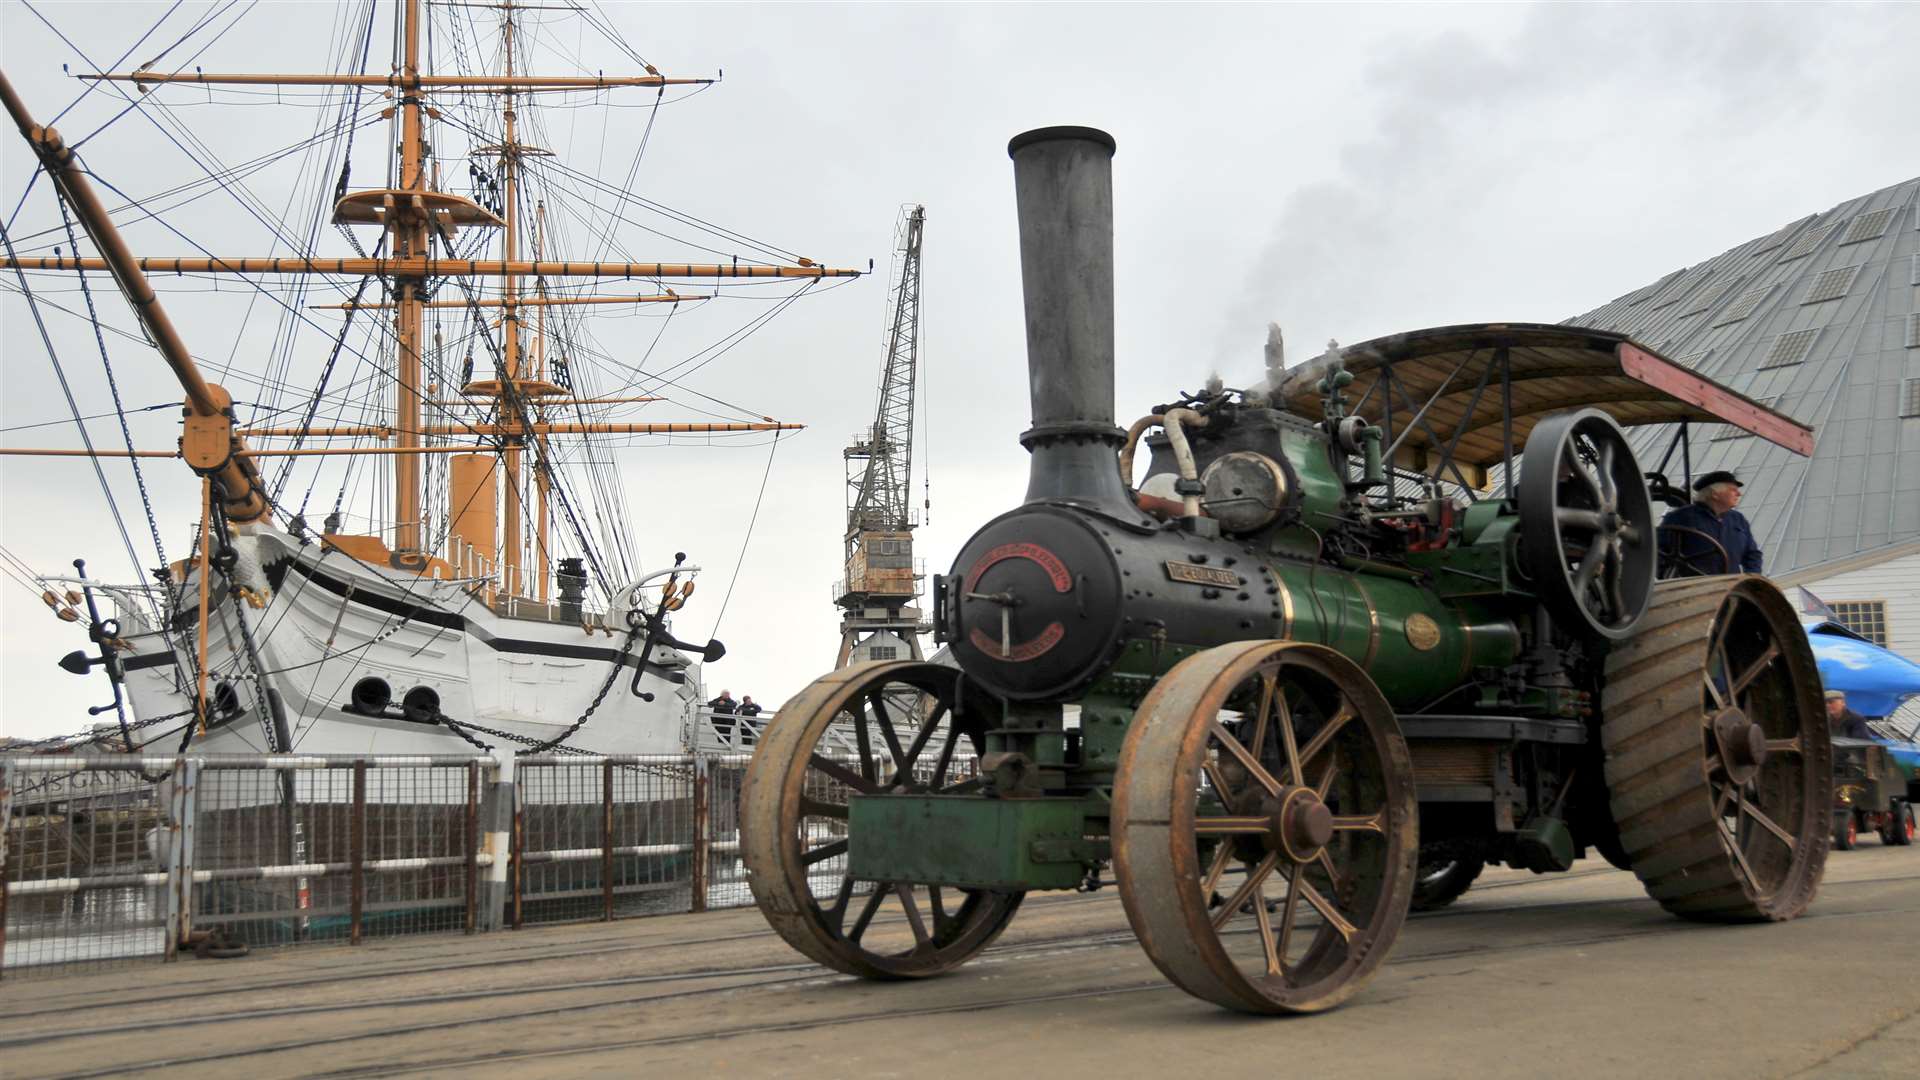 The Medway Festival of Steam and Transport